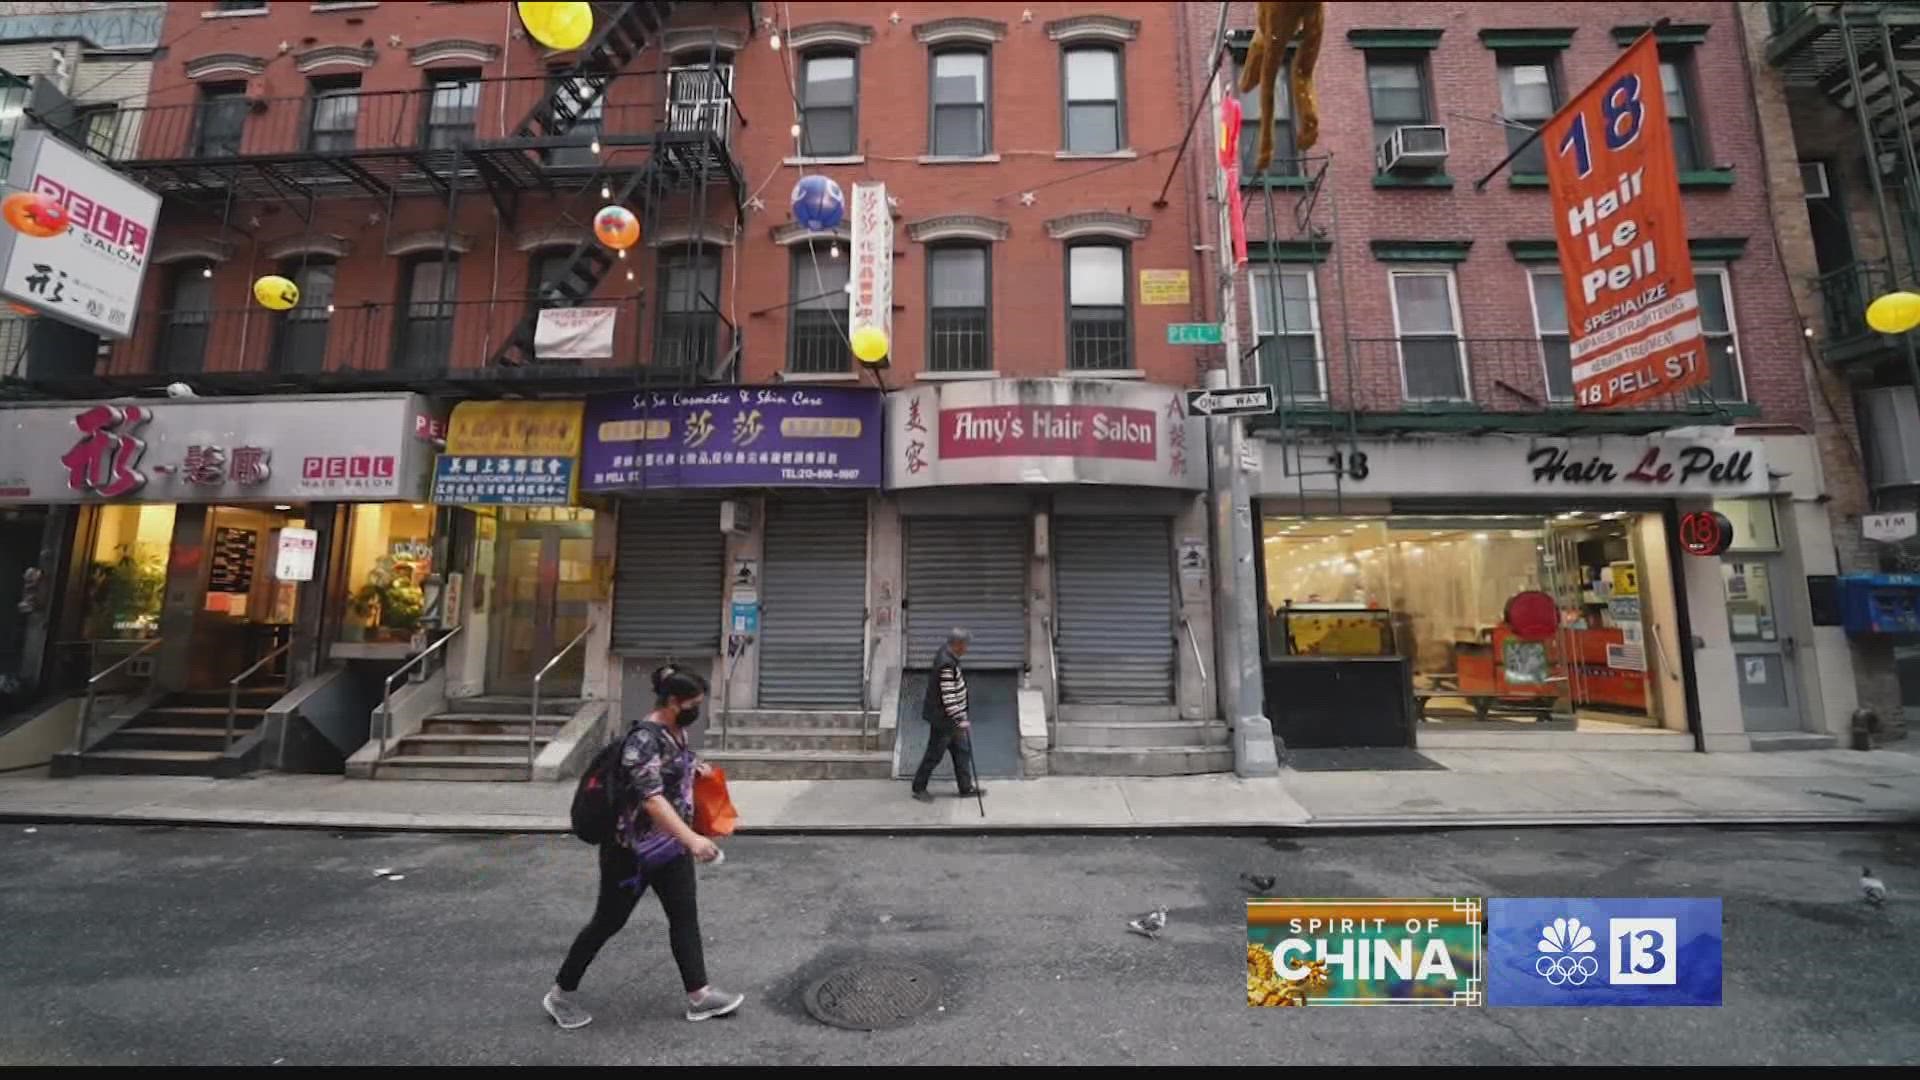 Canal Street Chinatown during Rush Hour on March 18, 2020 : r/nyc